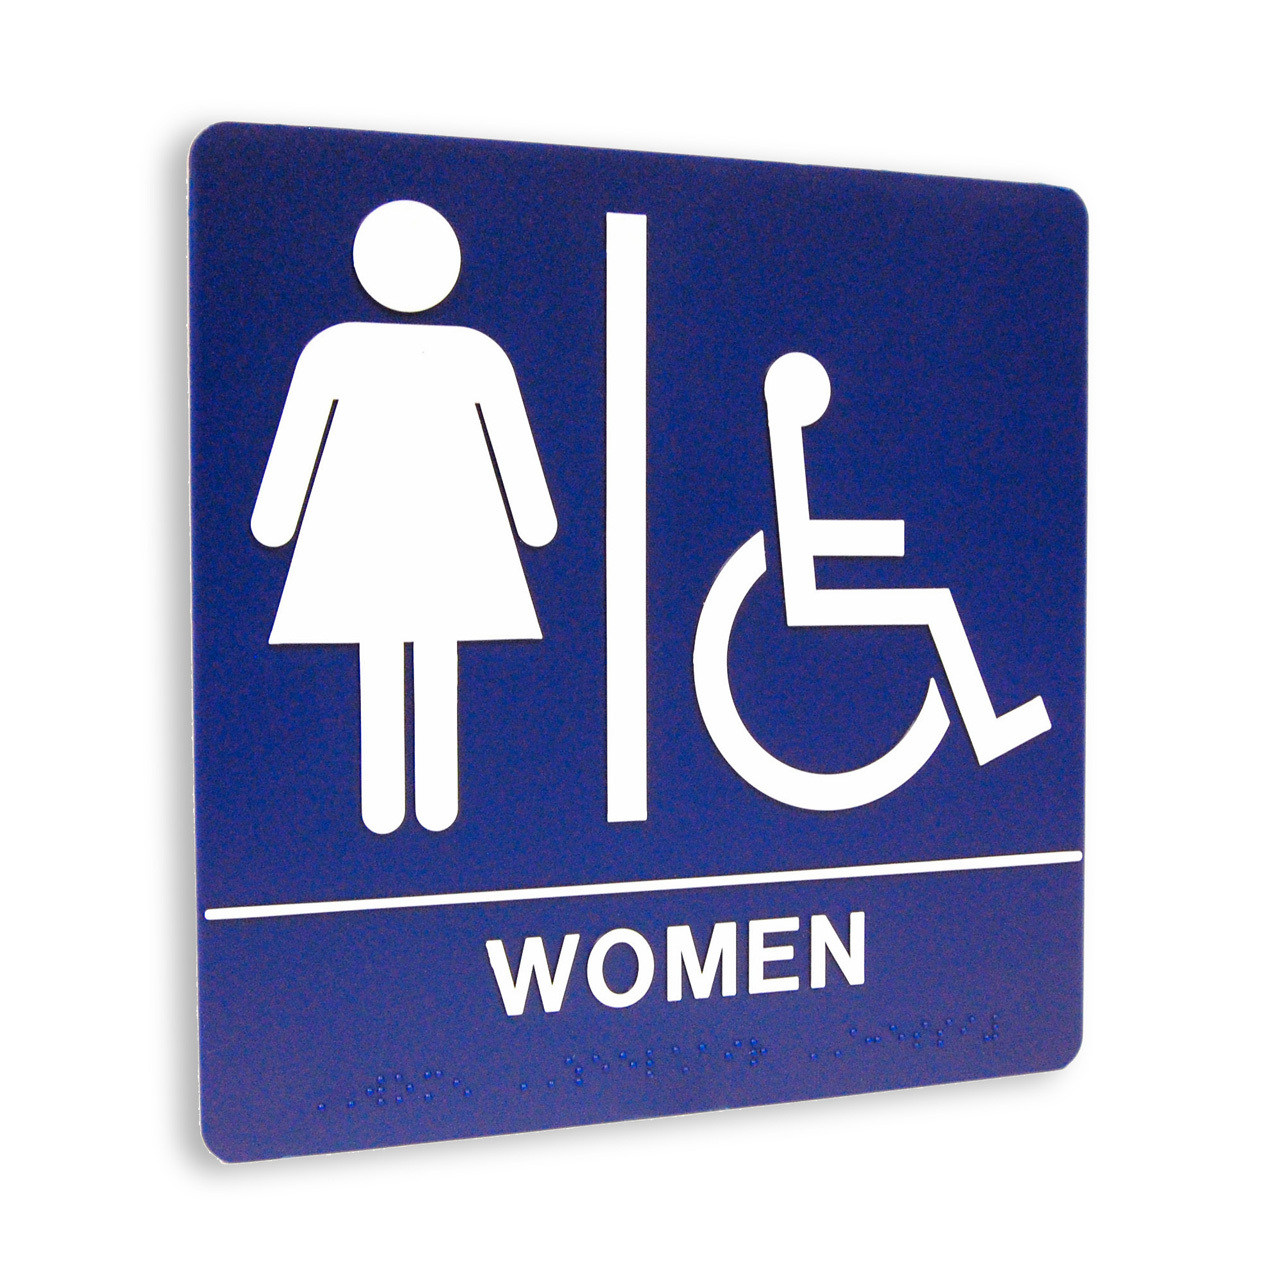 Restroom Sign   Women W Isa  4  Standard Colors   The